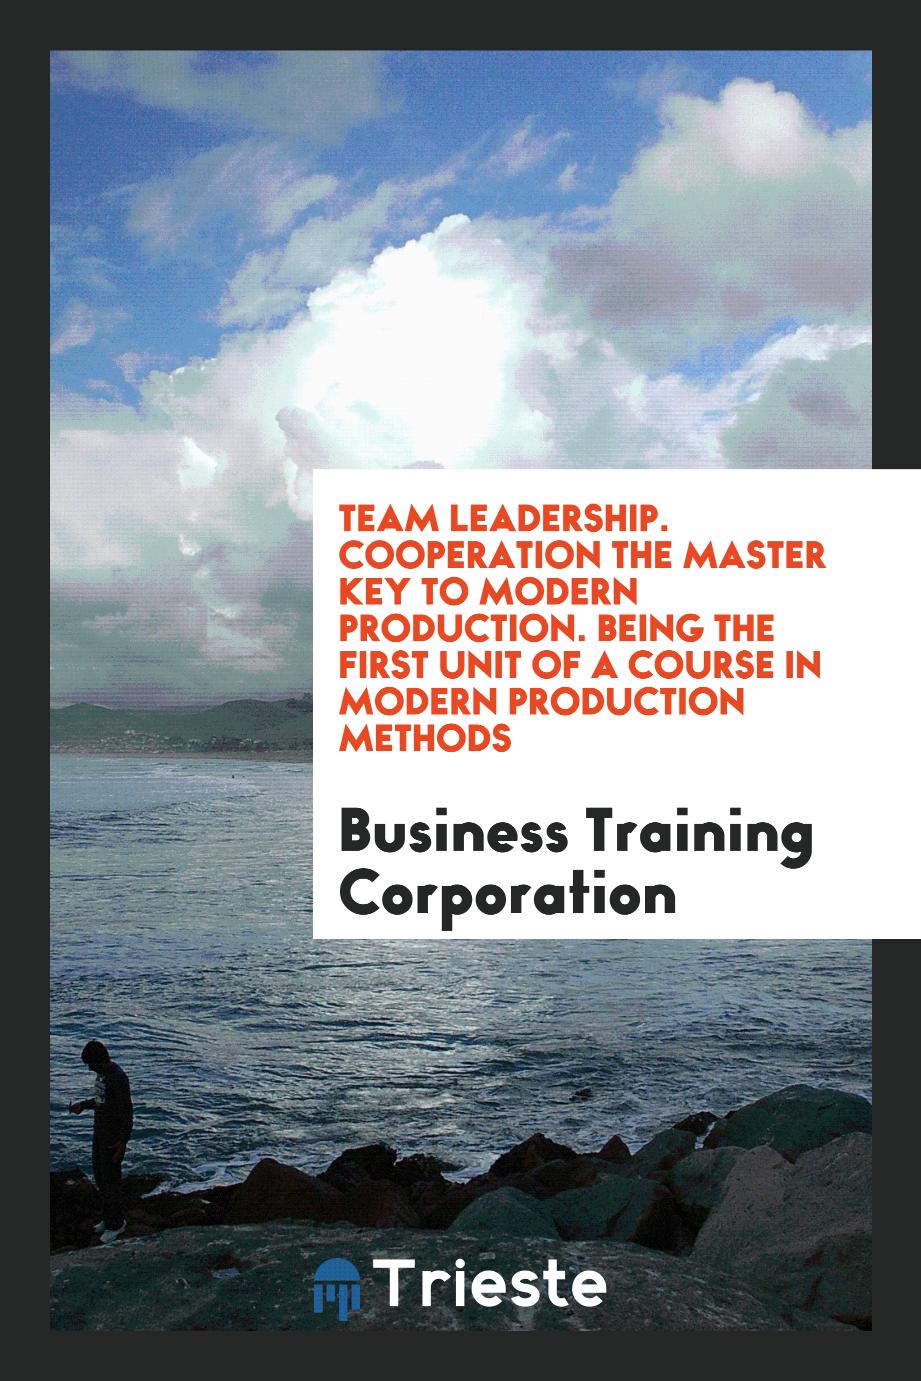 Team Leadership. Cooperation the Master Key to Modern Production. Being the First Unit of a Course in Modern Production Methods